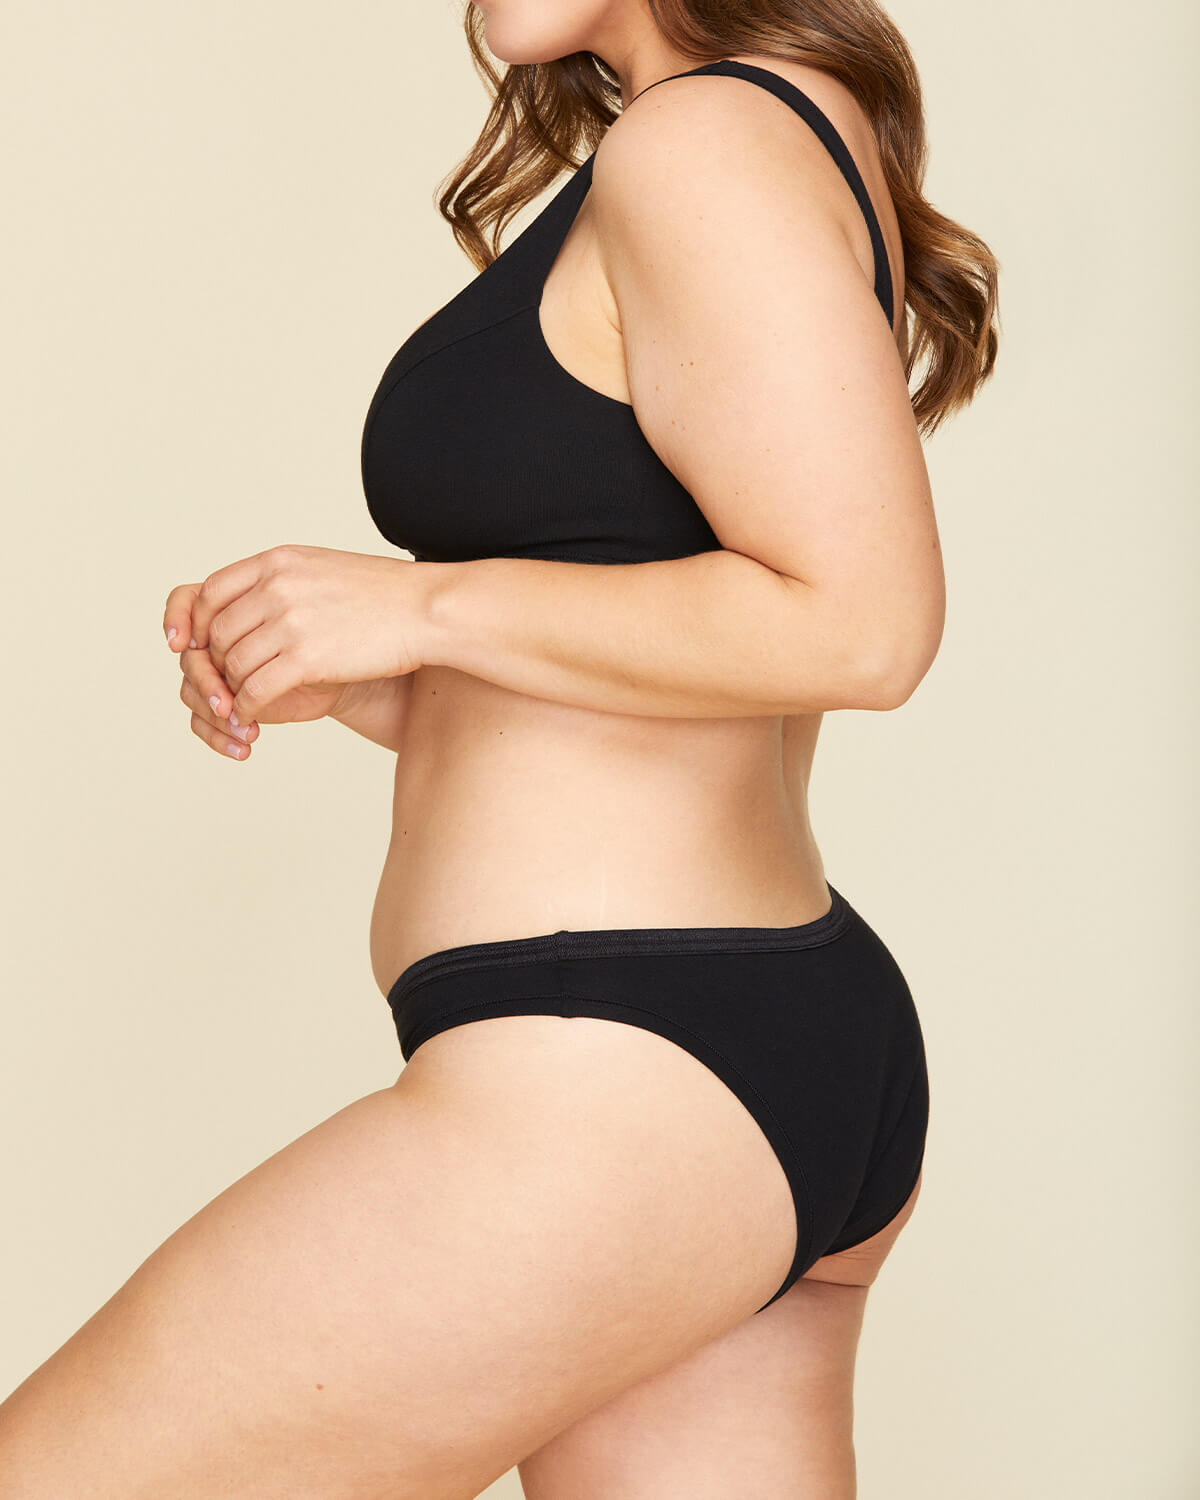 Subset Organic Cotton Low-Rise Bikini: Available in sizes 2XS-3XL